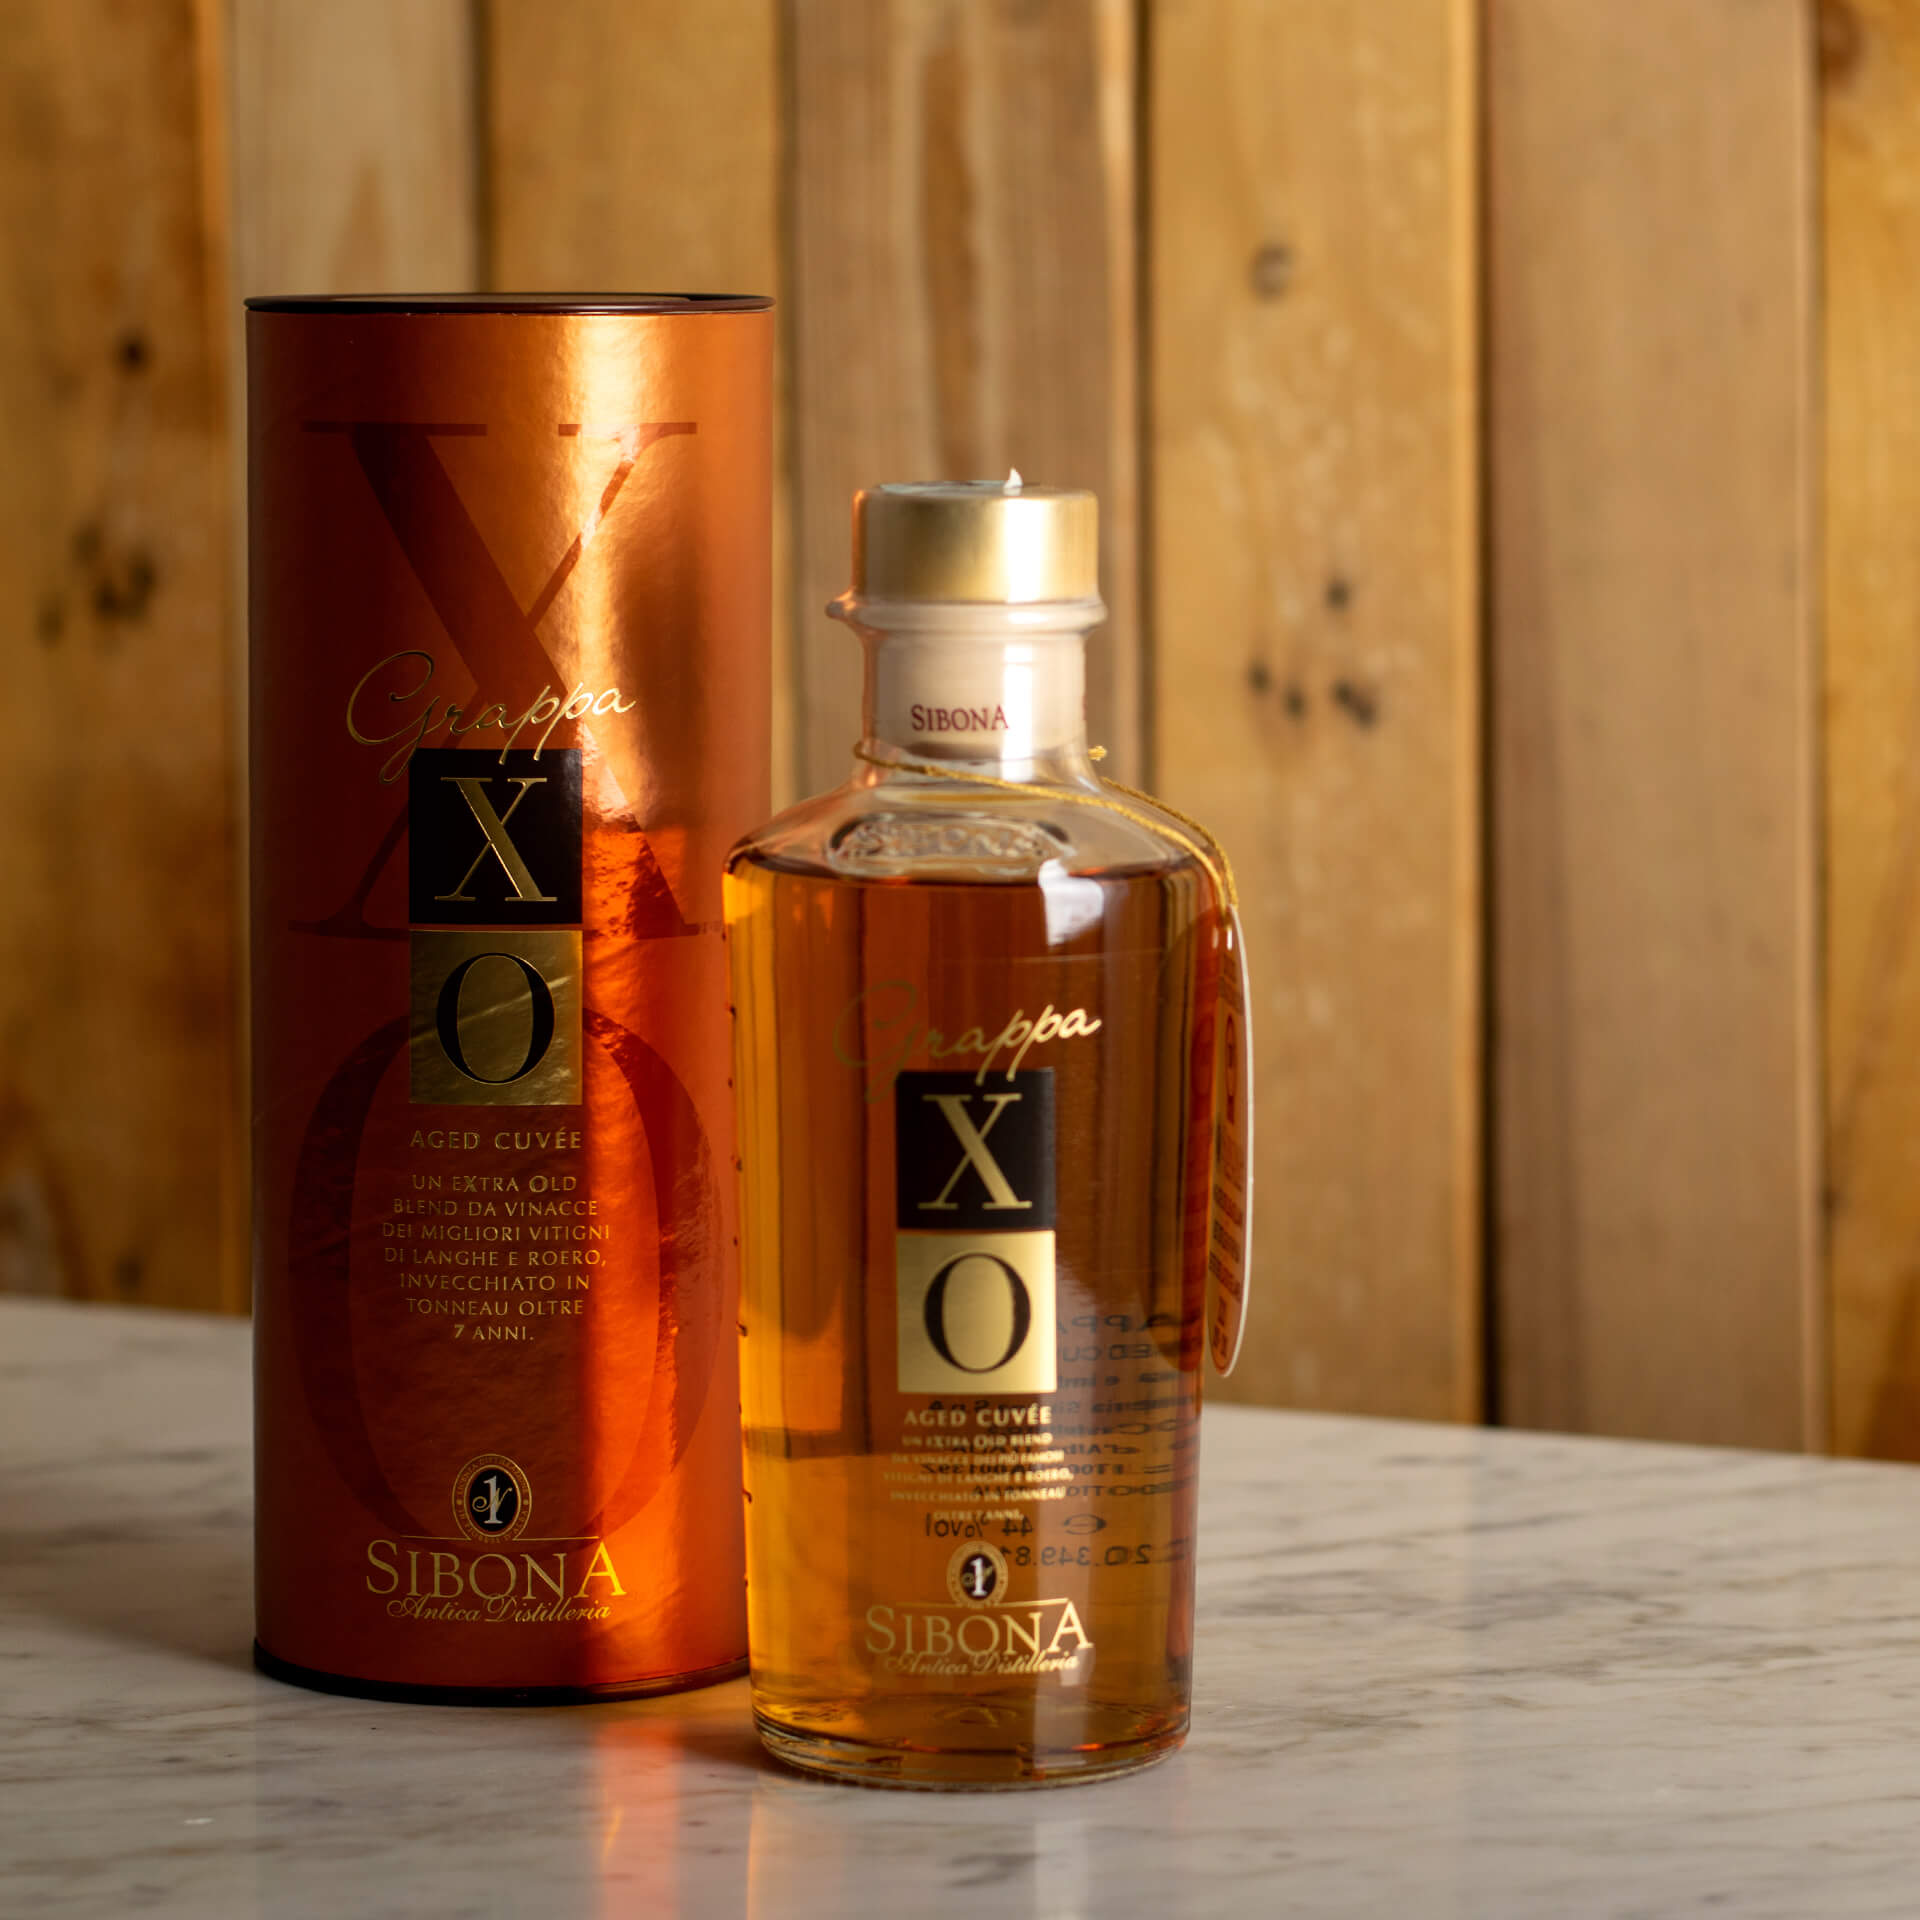 Grappa XO Aged Cuvée Extra Old